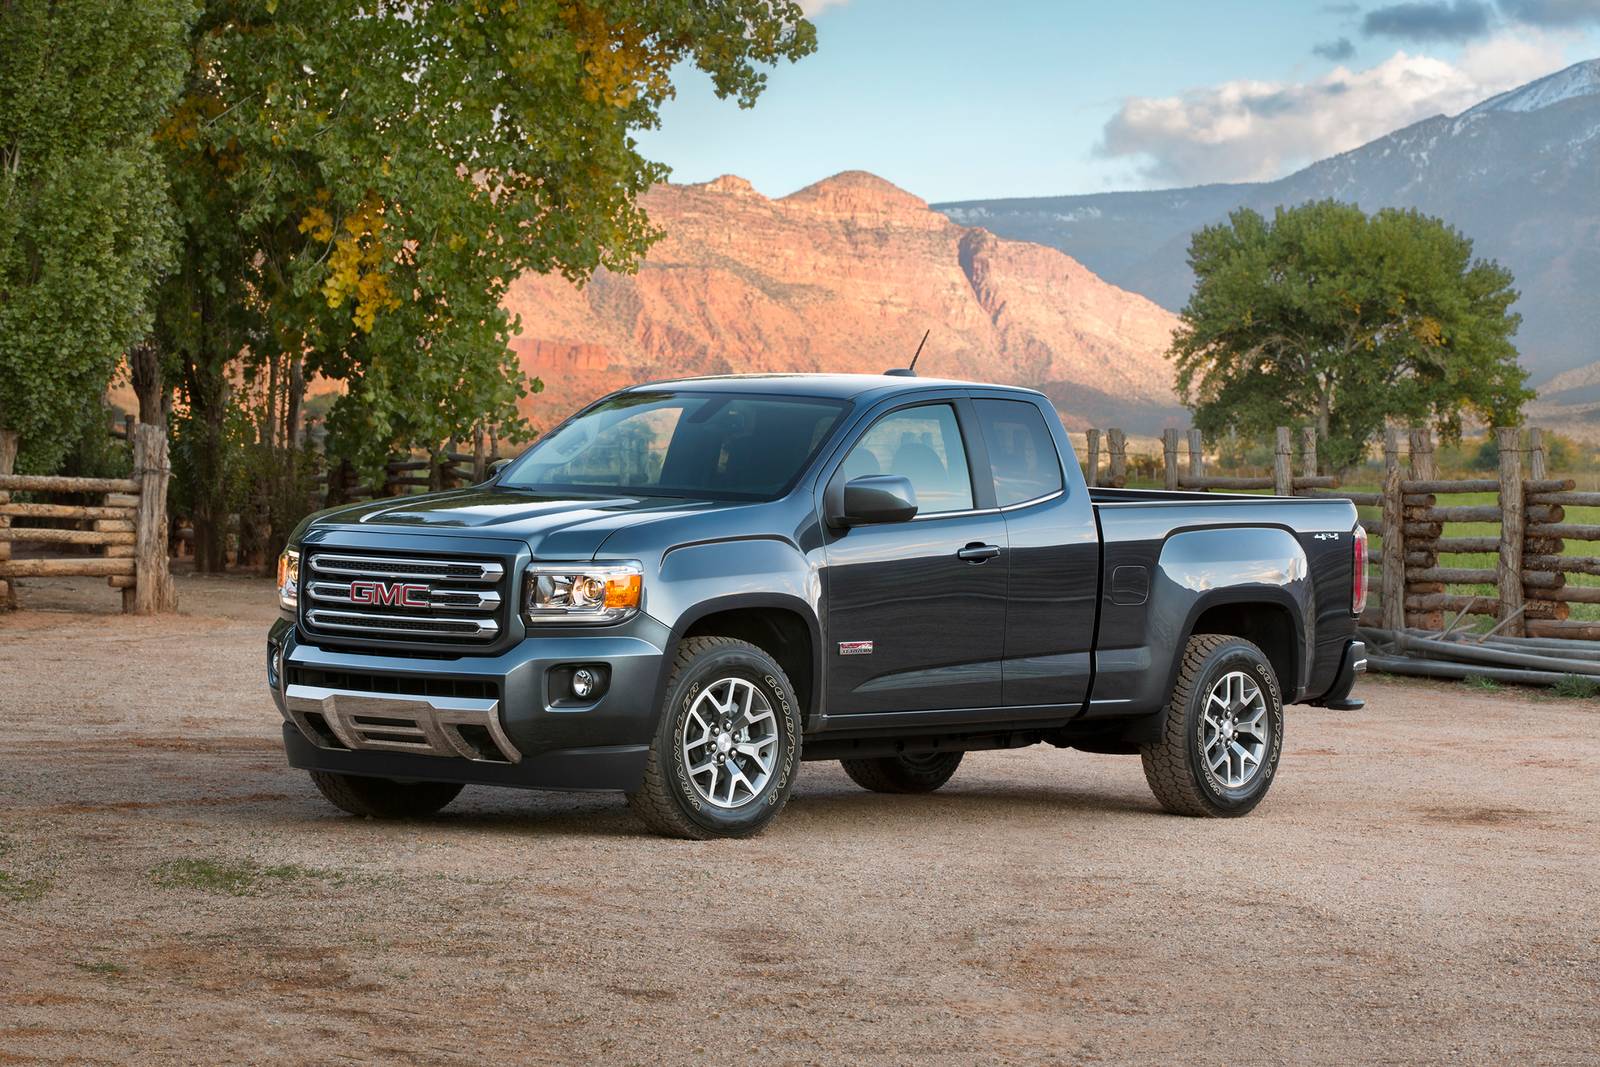 2018 GMC Canyon Review & Ratings | Edmunds